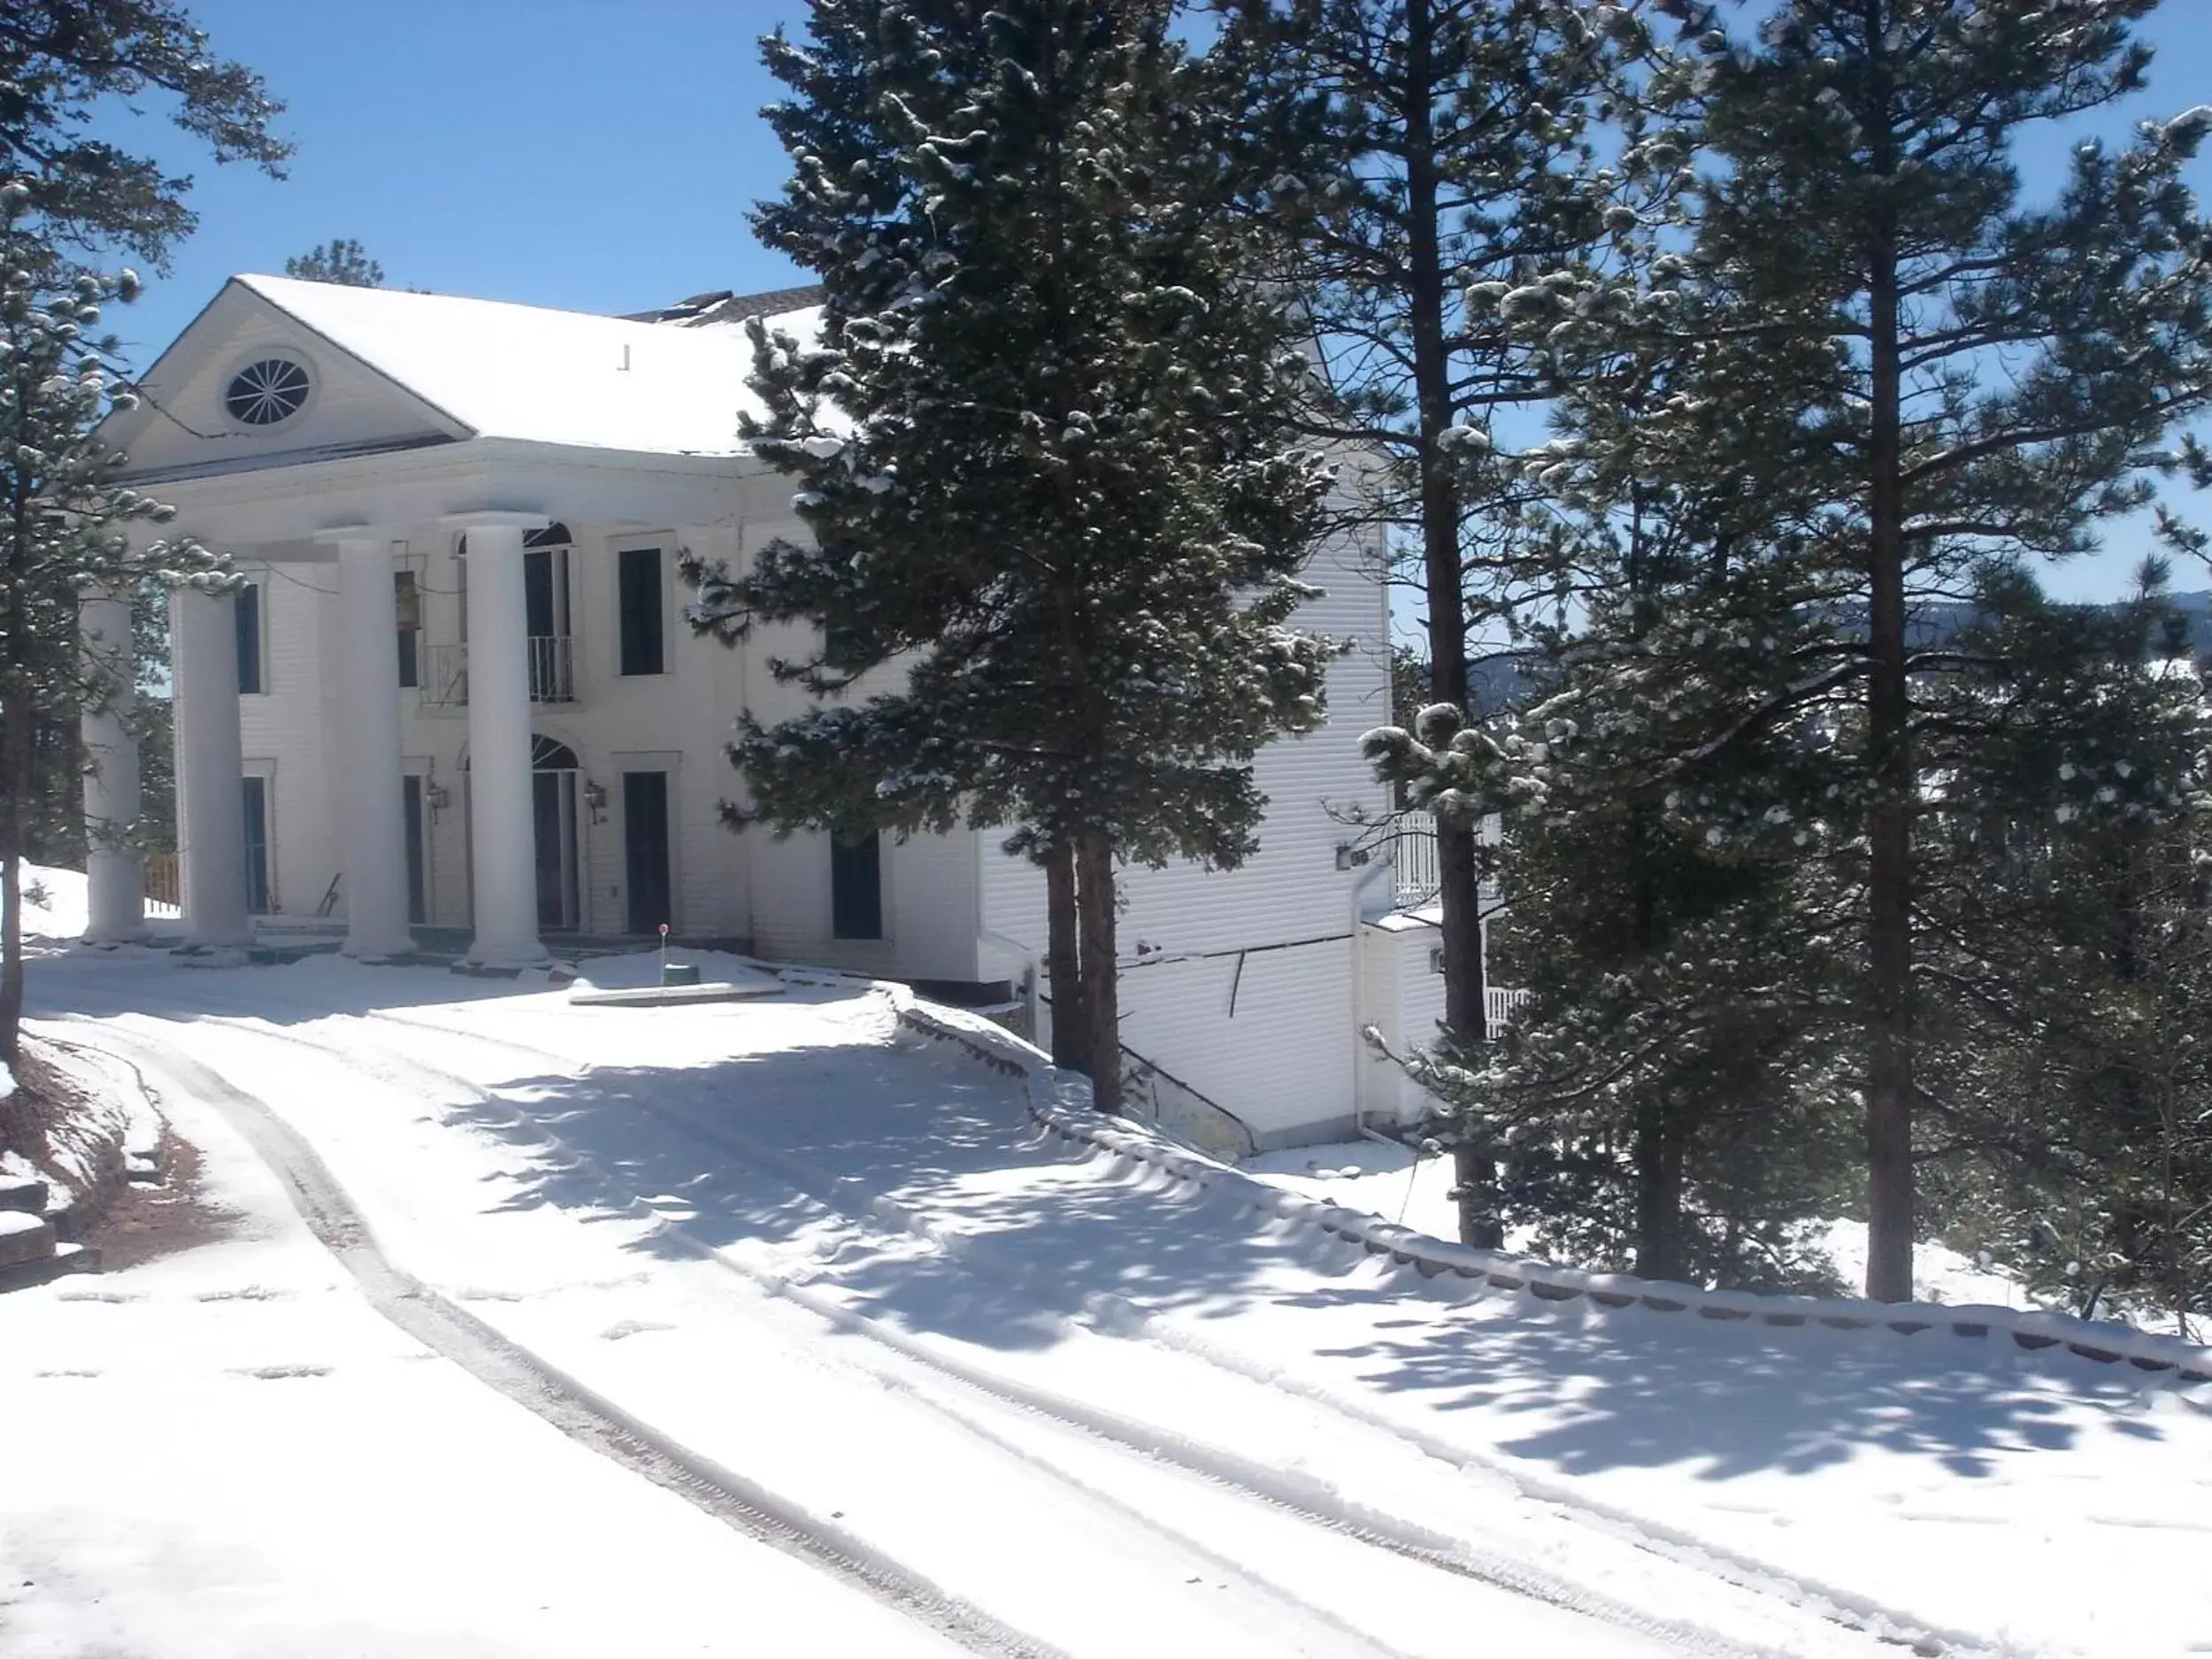 Property building, Winter in Pikes Peak Paradise Bed and Breakfast